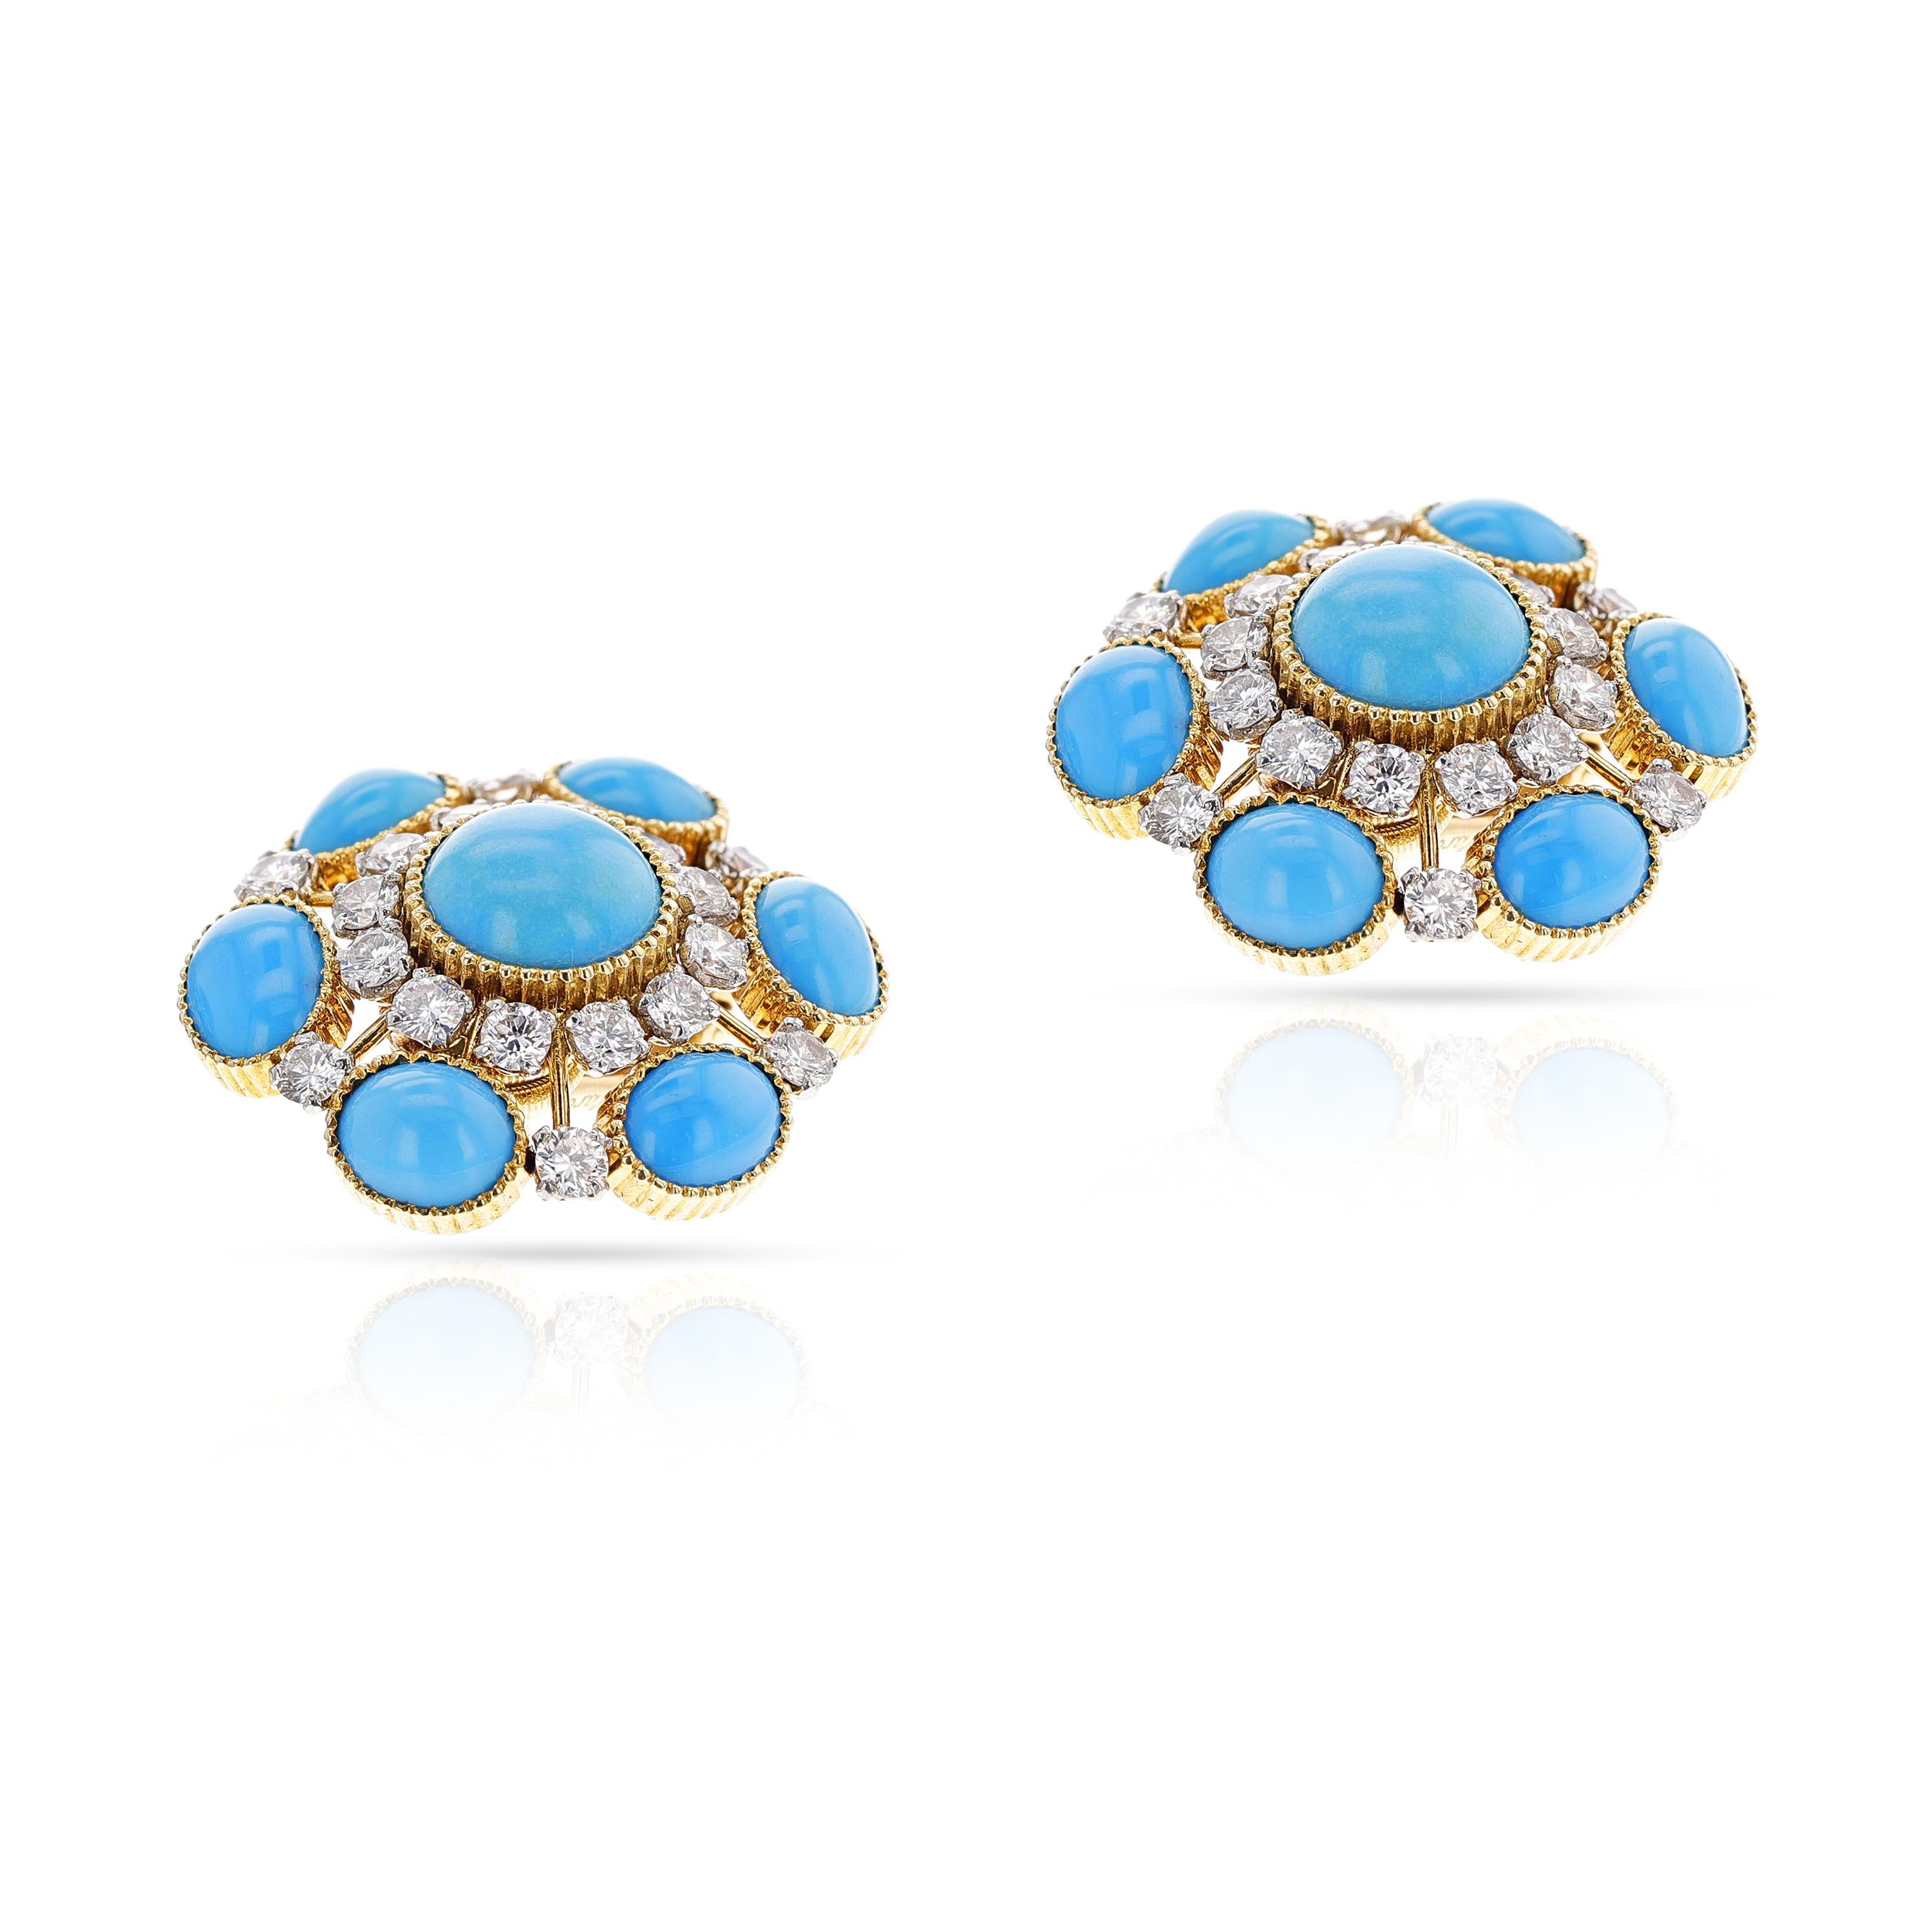 Cartier Turquoise Cabochon and Diamond Earrings. Signed and numbered. Total Weight: 19.90 grams. Length: 1